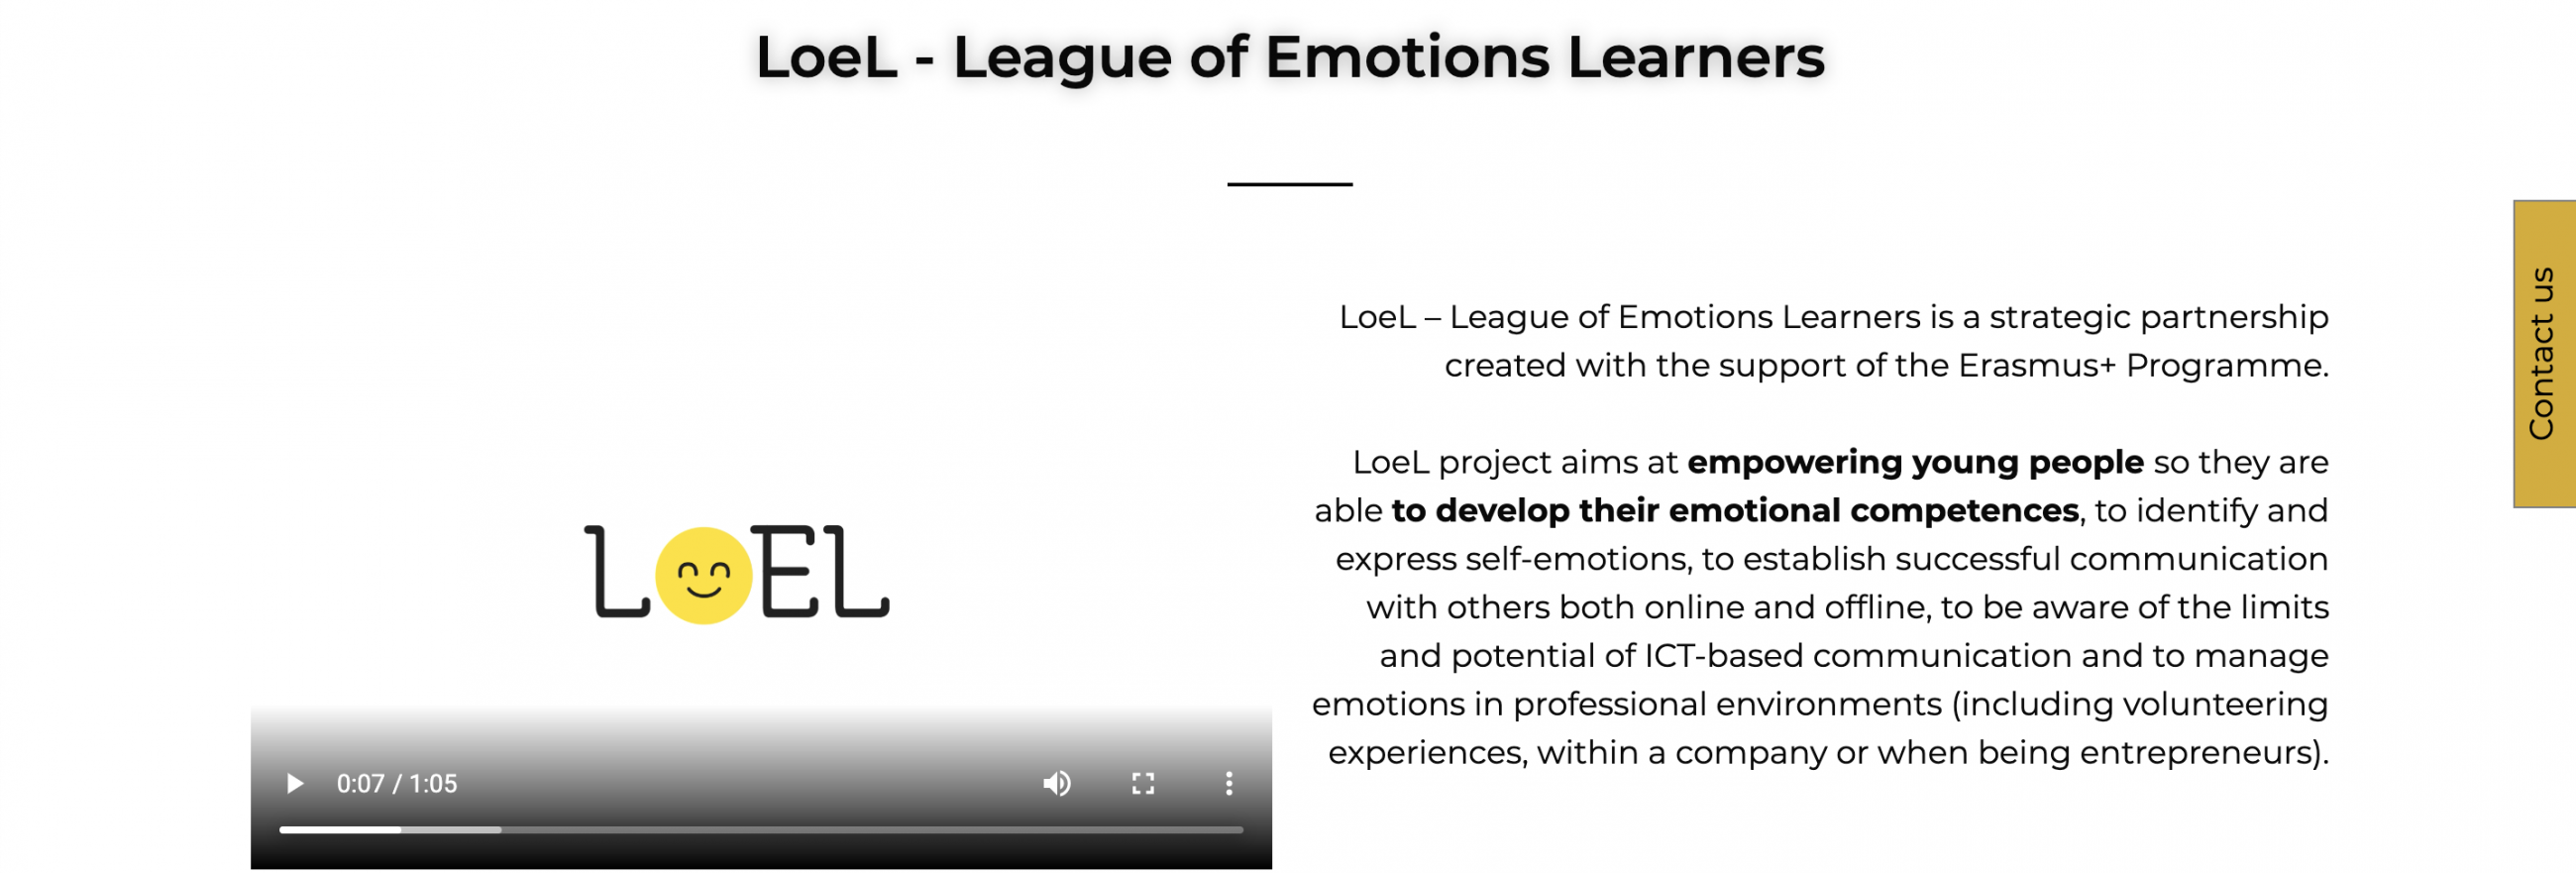 League of emotional learners picture